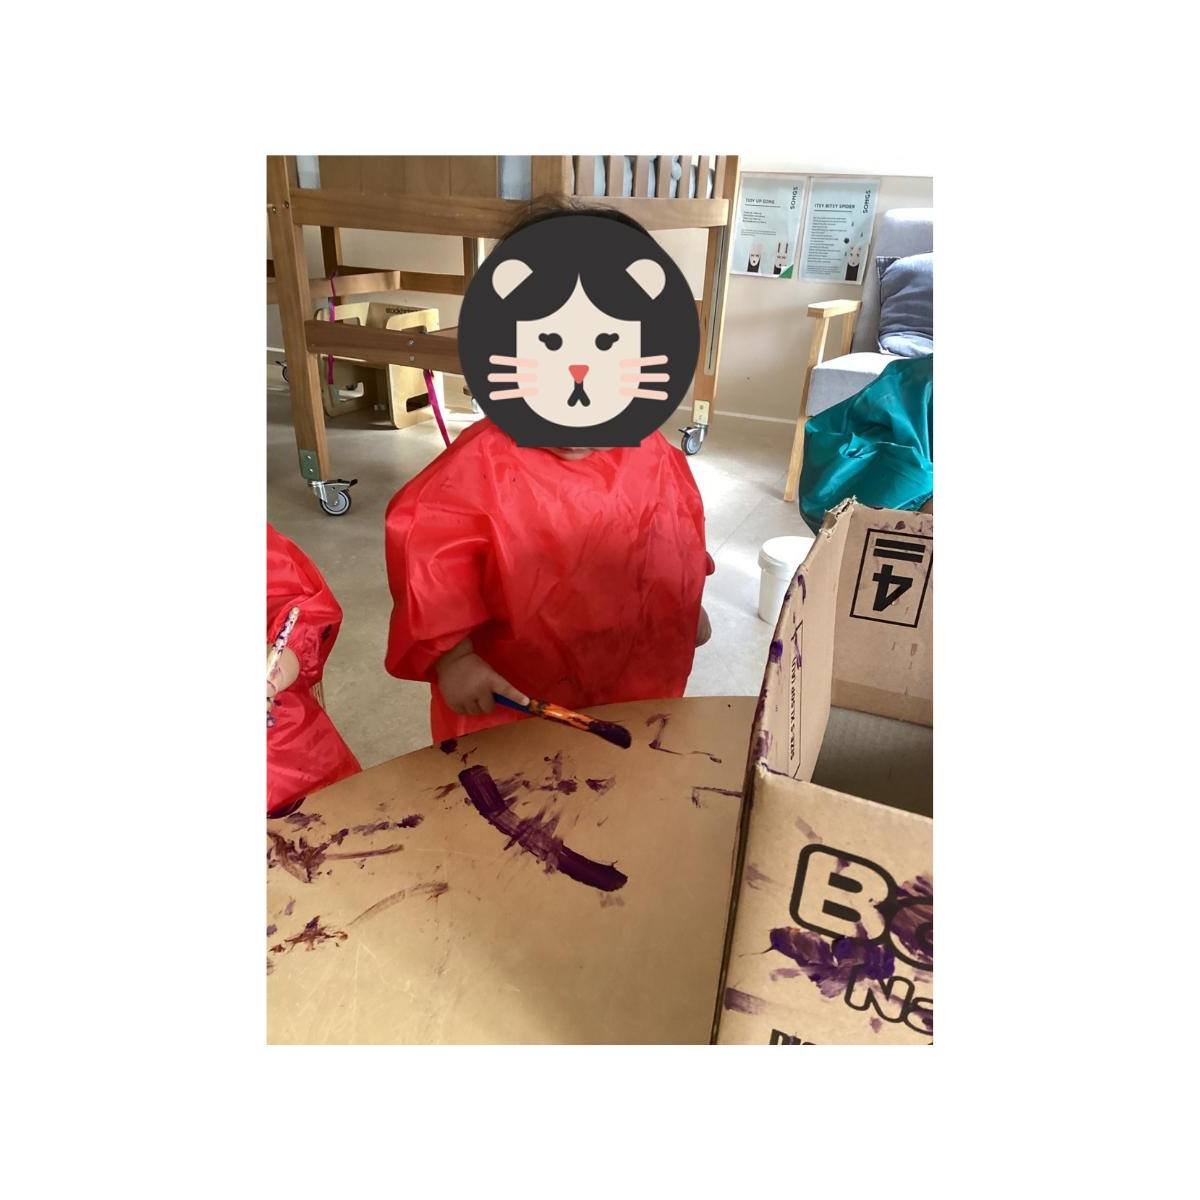 Bright babies are exploring with car painting on cardboard boxes today! 🎨 Not only are they discovering colours and textures, but they're also building their fine motor skills as they grasp and play with brushes. 

#babiesroom #brightbabies #HEI #he